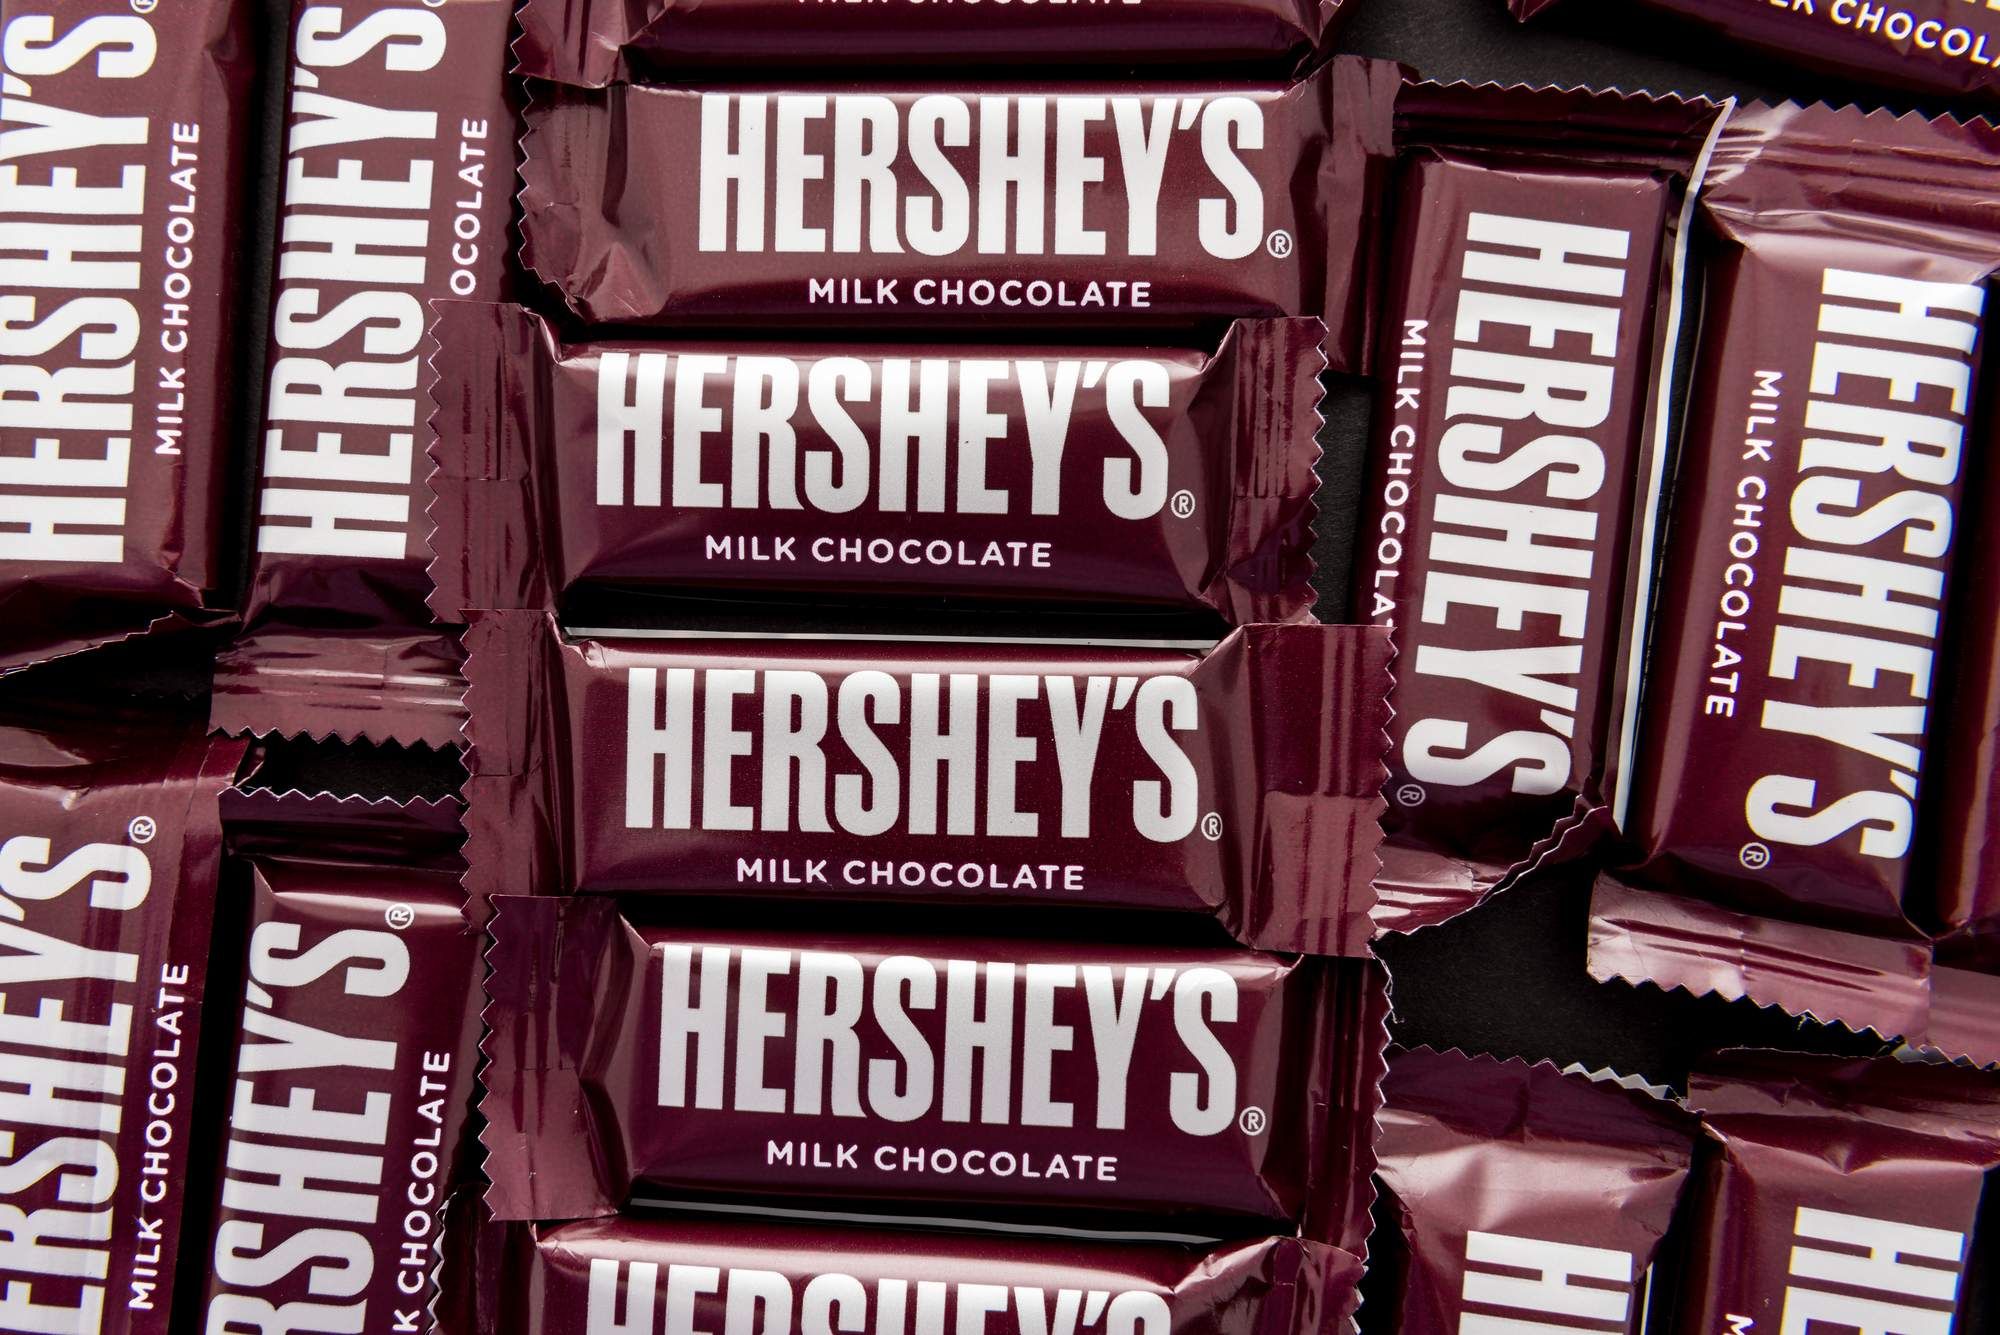 Hershey's chocolate regarding the hershey slavery child labour class action lawsuit filed